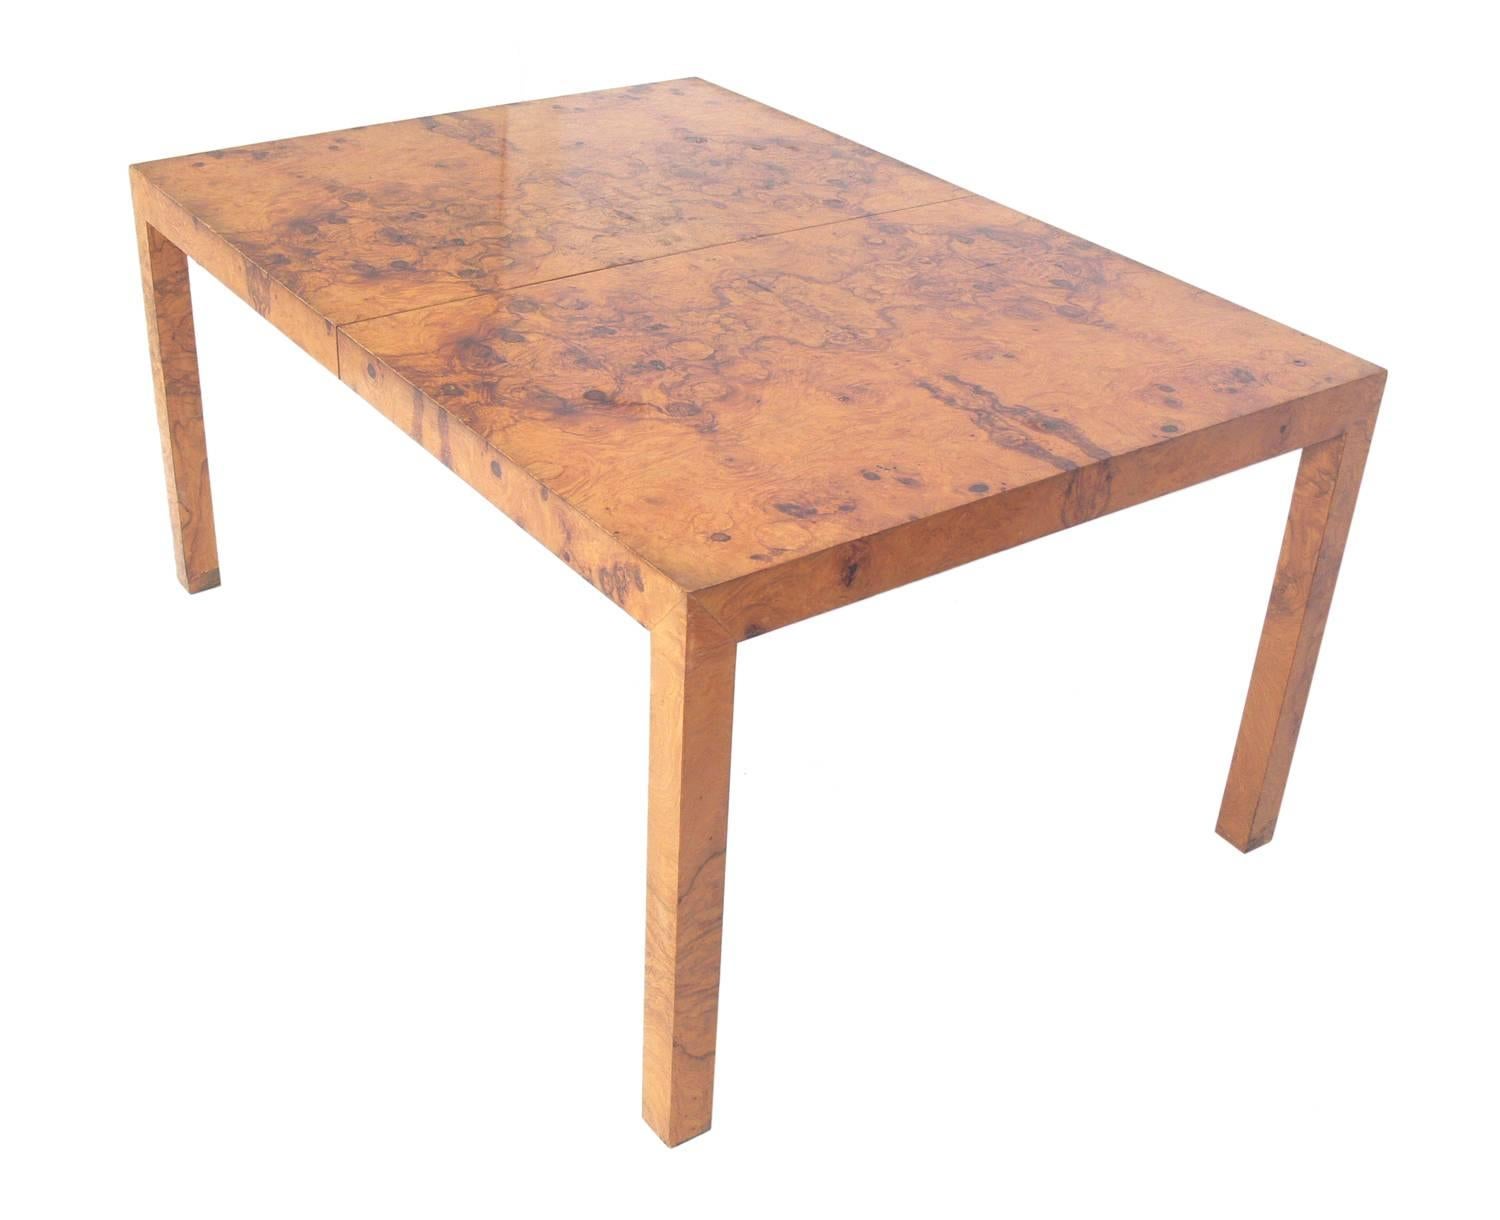 Clean lined burl wood dining table, designed by Milo Baughman, American, circa 1960s. With all three leaves installed, the tables measures an impressive 90